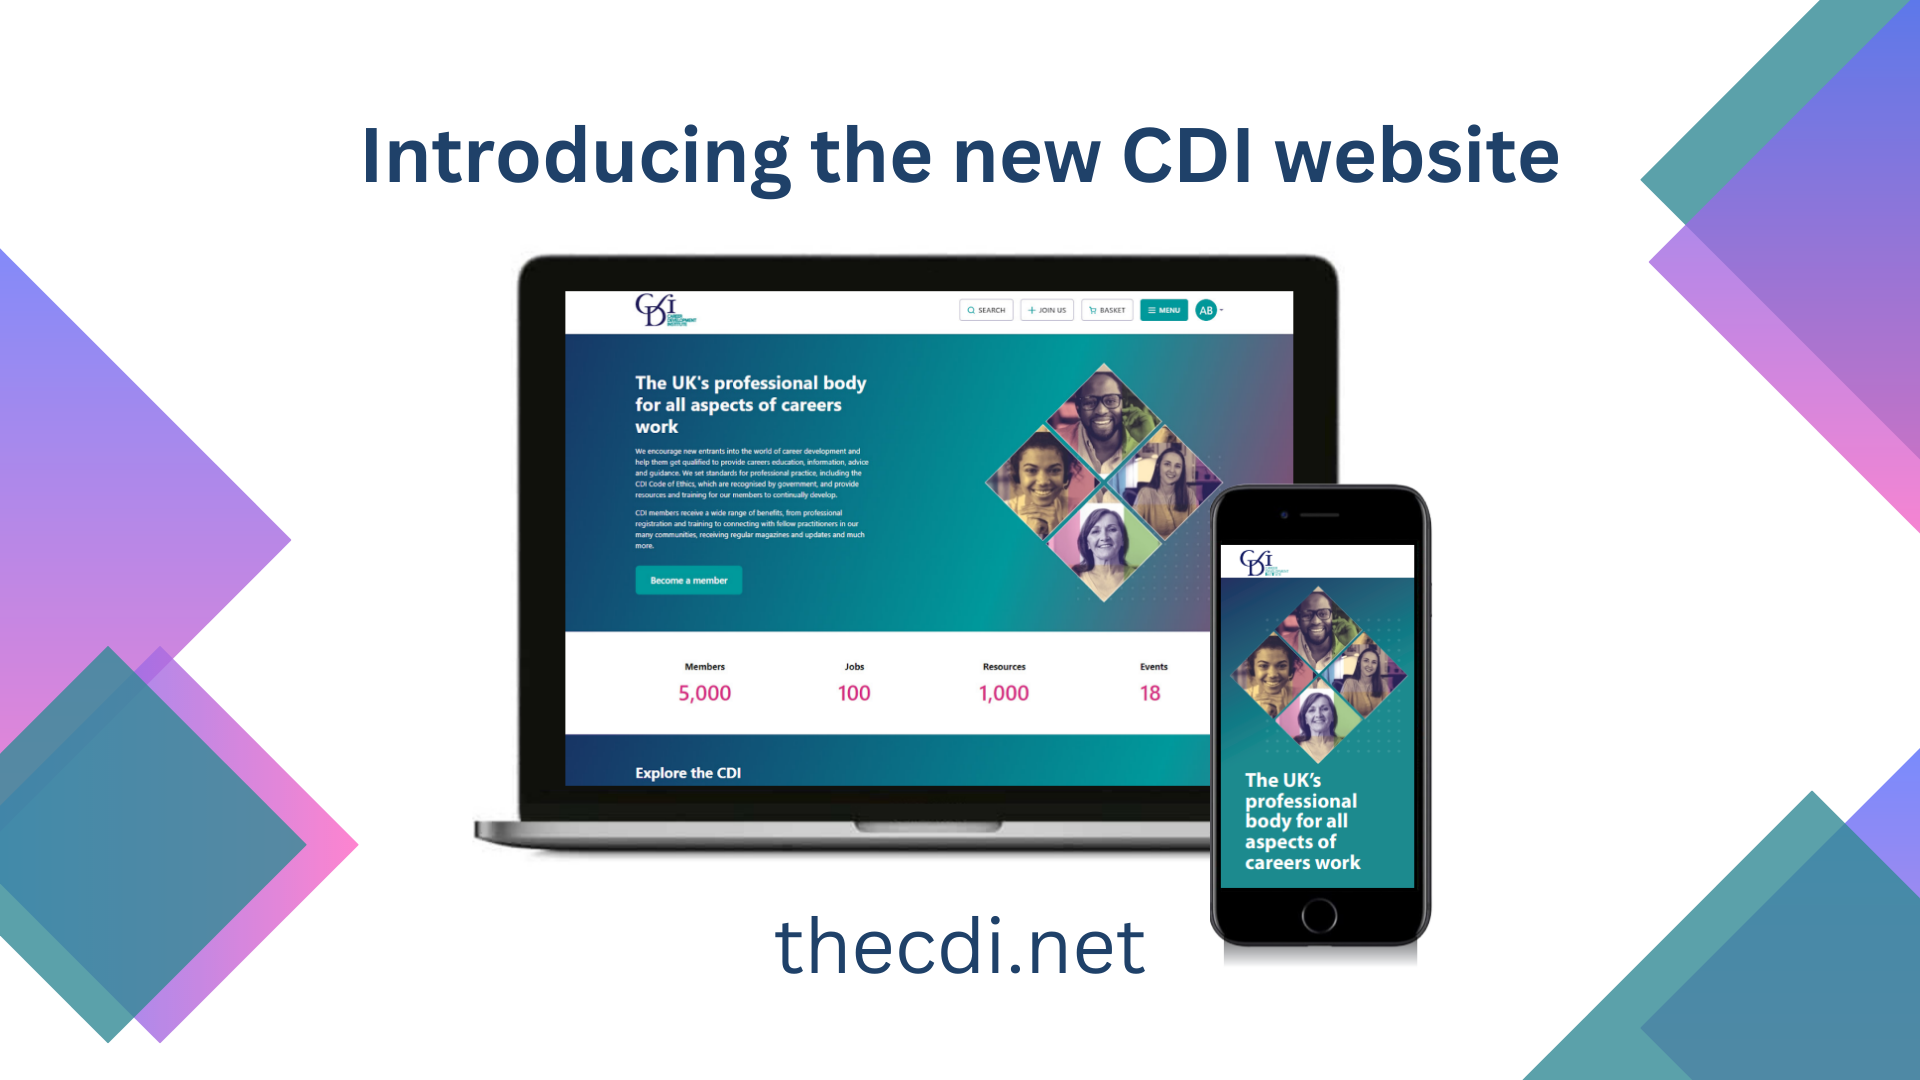 Learn all about the new CDI website